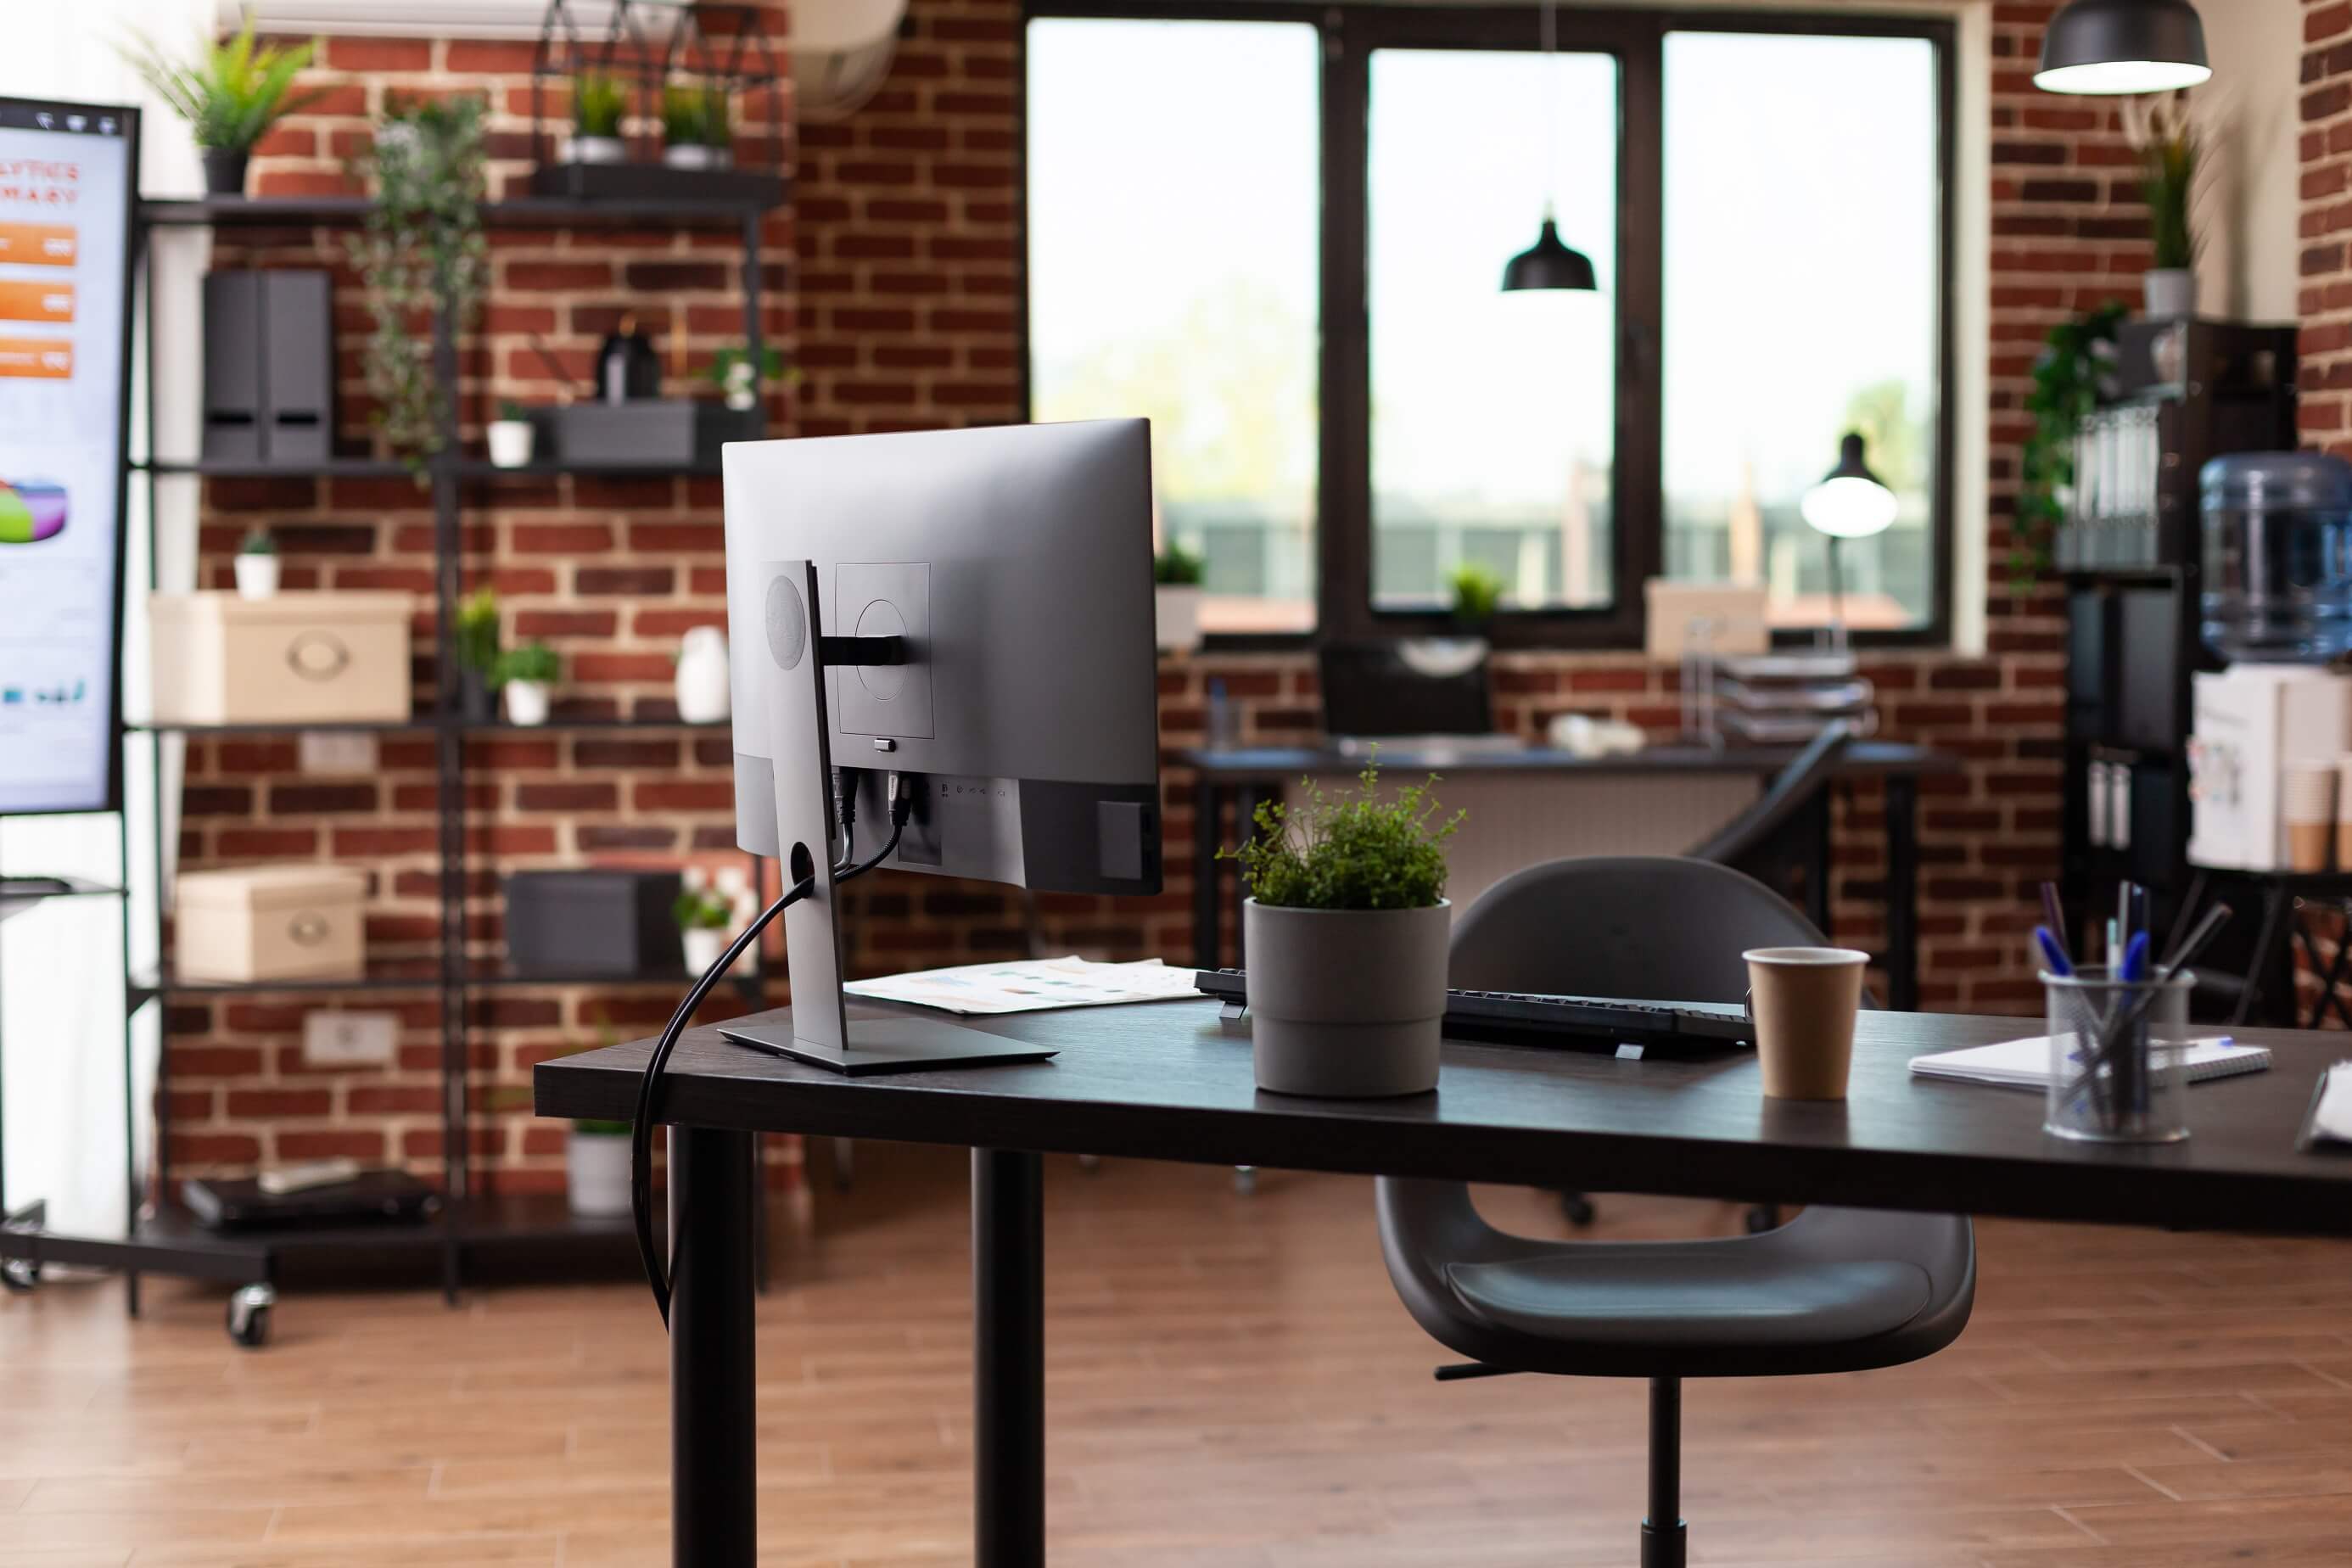 Photo of an empty office with desks and plants.